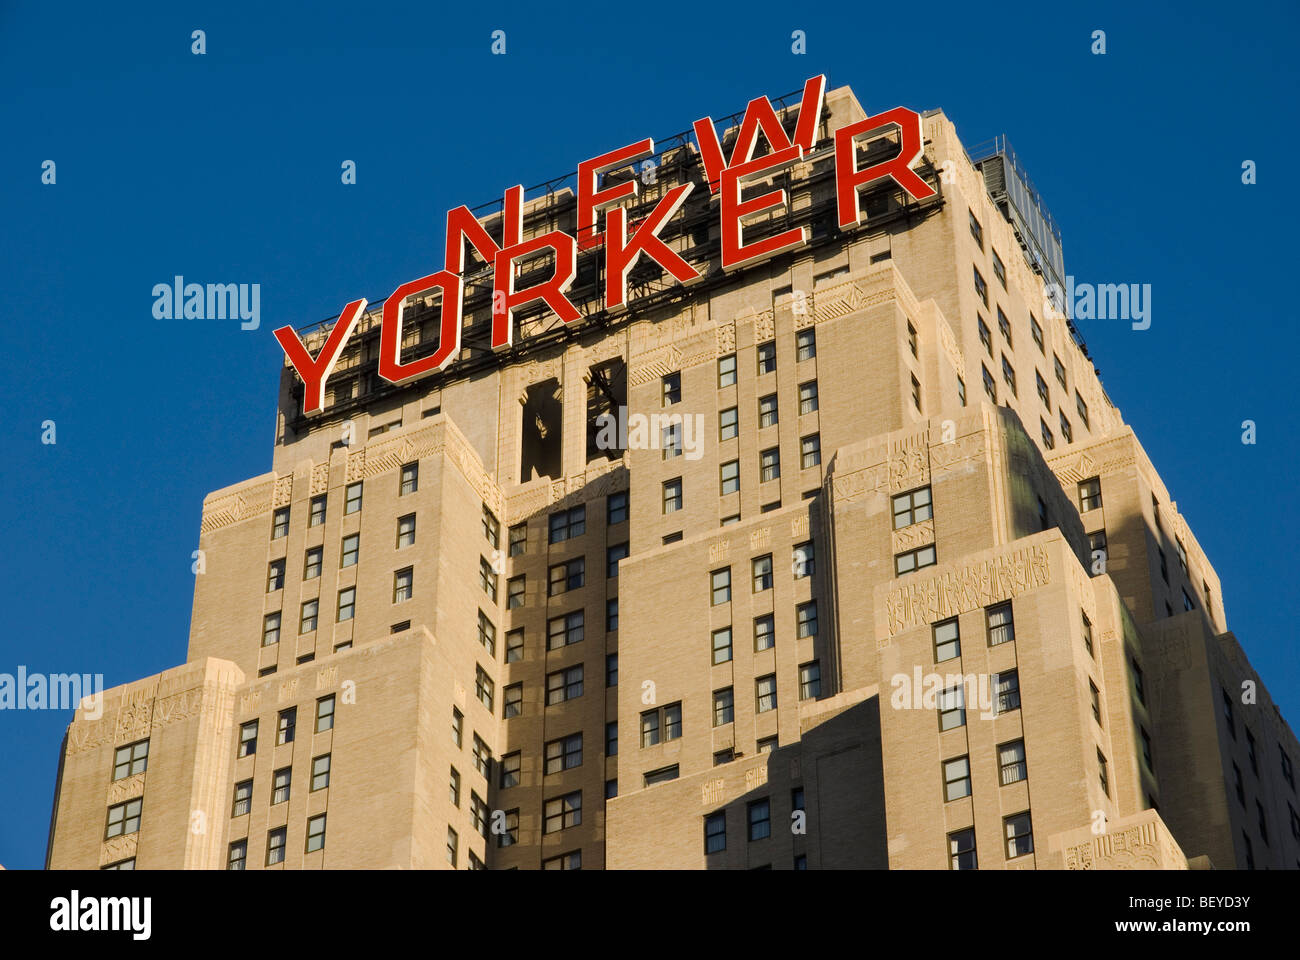 New Yorker Hotel, New York City Banque D'Images